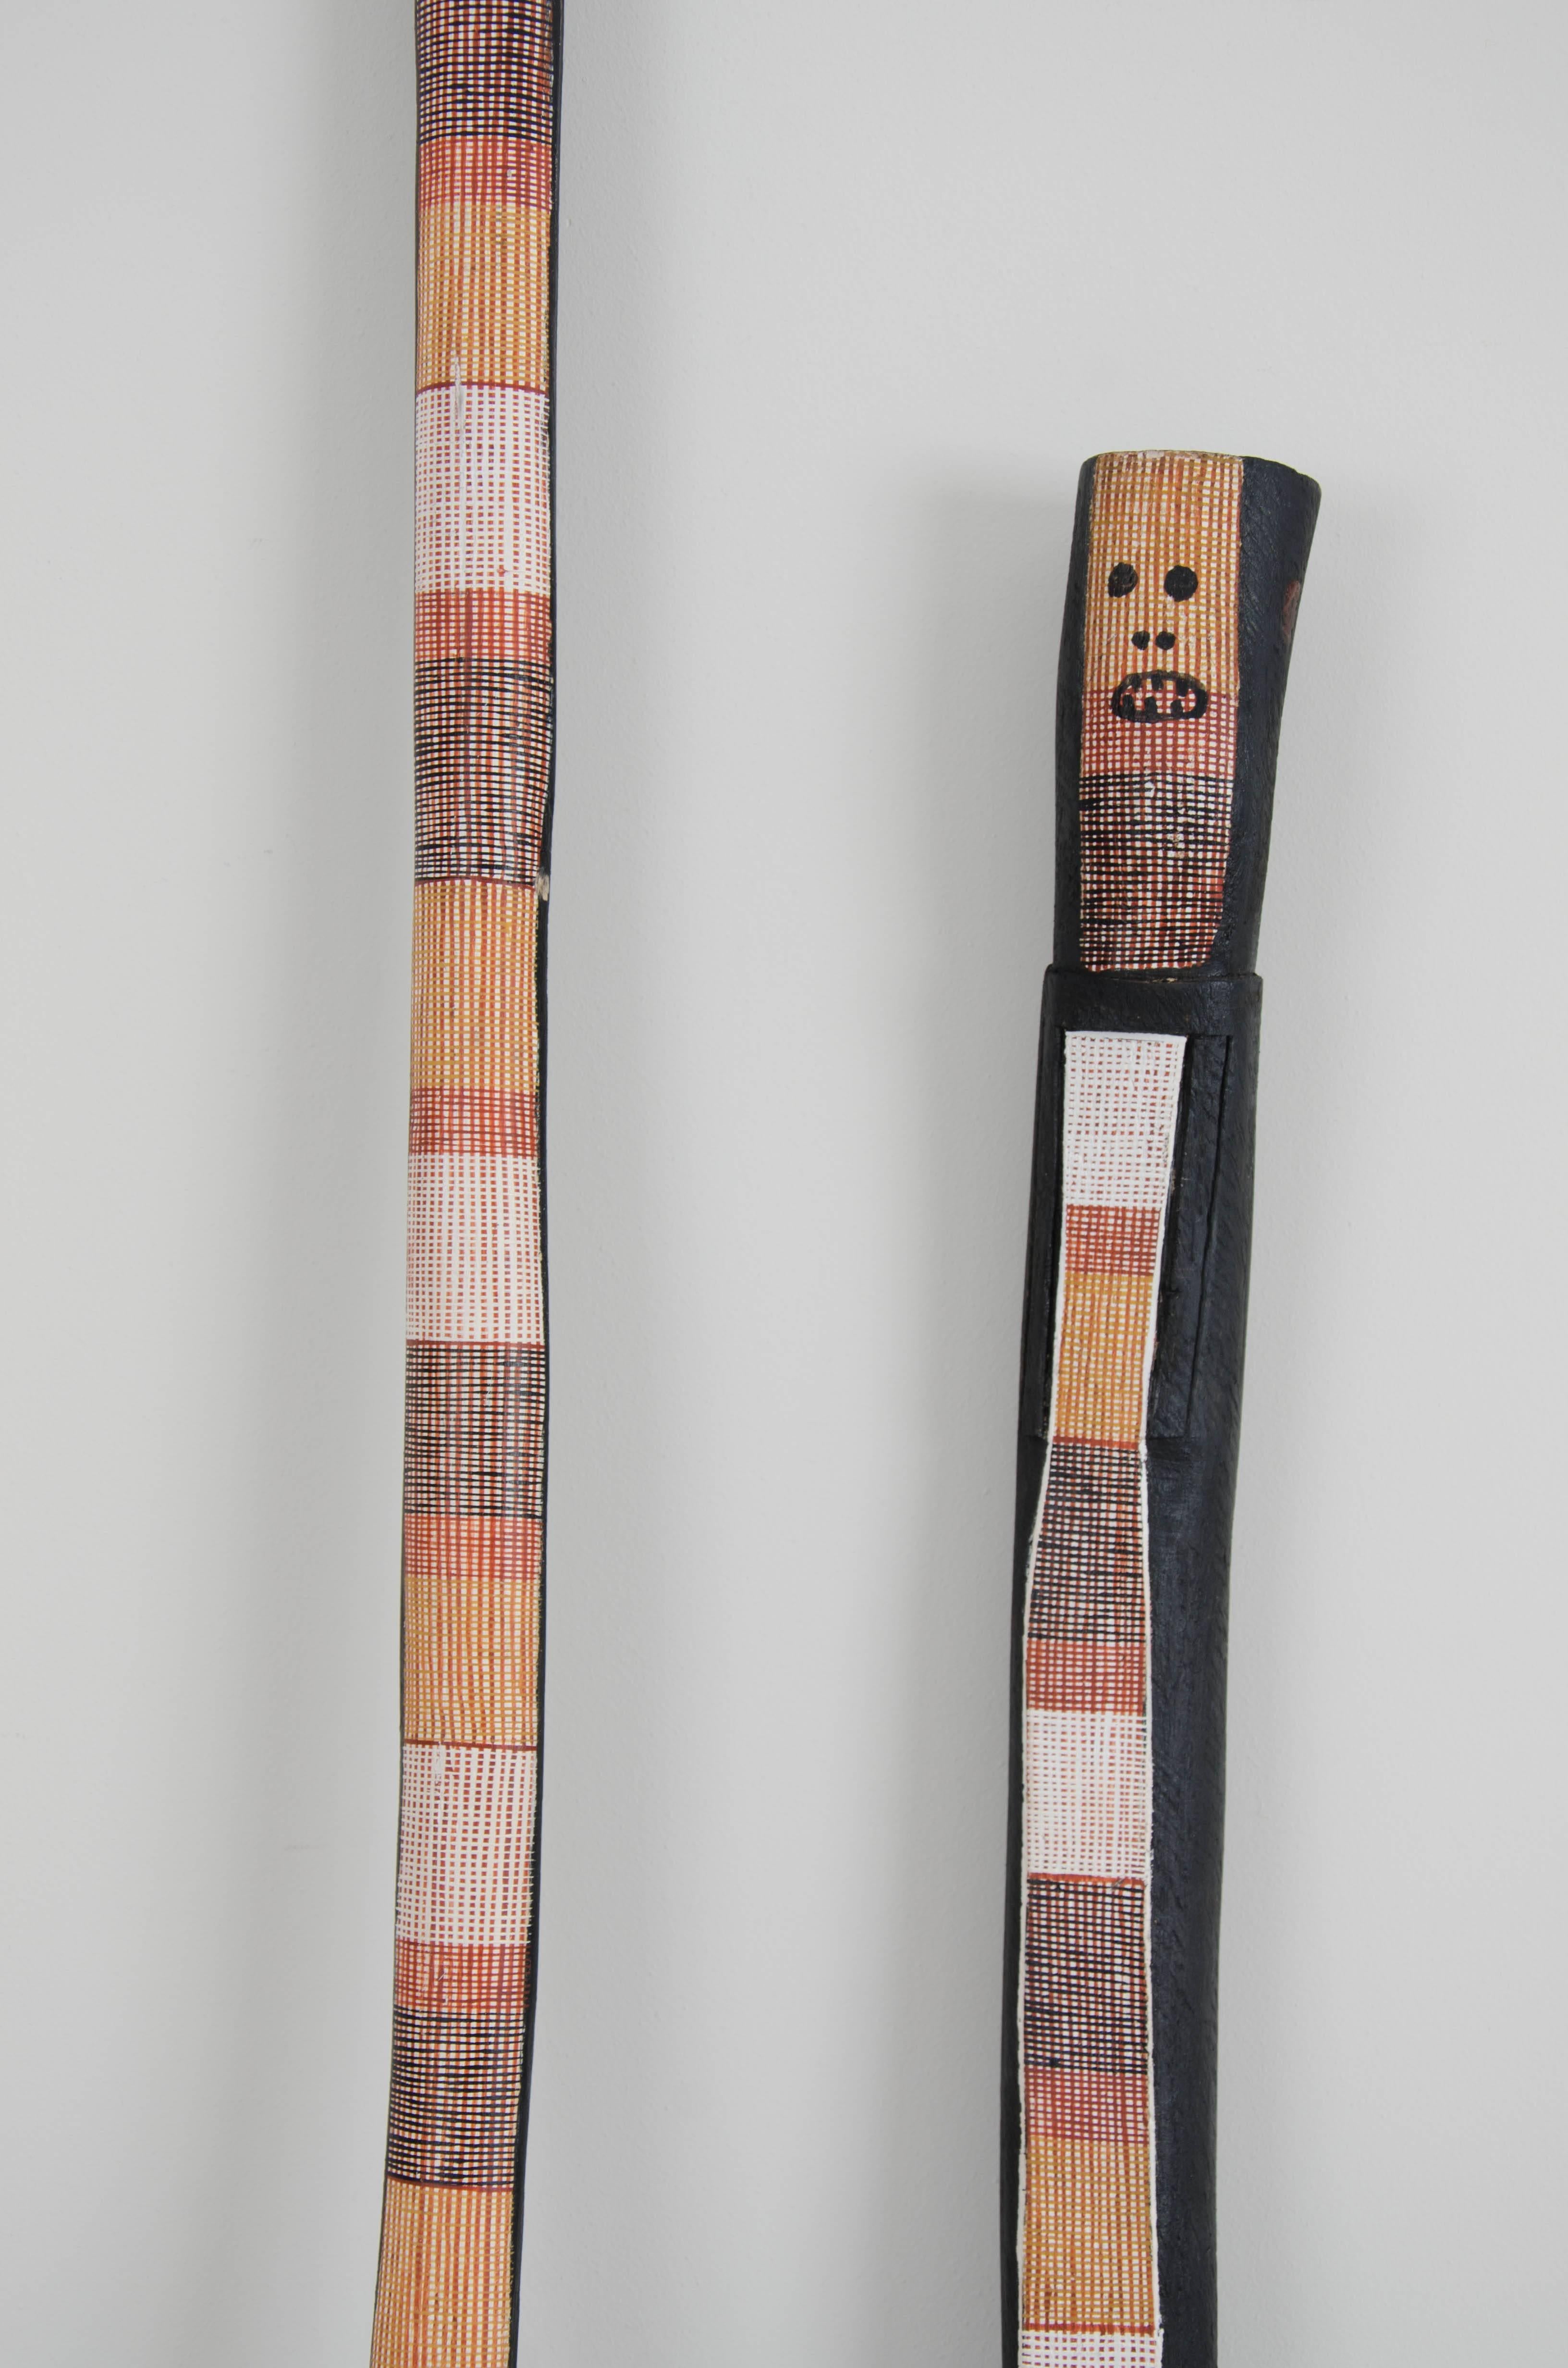 An exquisite pair of finely painted 'mimih spirits' from Australia, which include metal stands.

Aboriginal people in the rocky environments of western and south-western 
Arnhem Land tell of the existence of tall slender spirits which they call